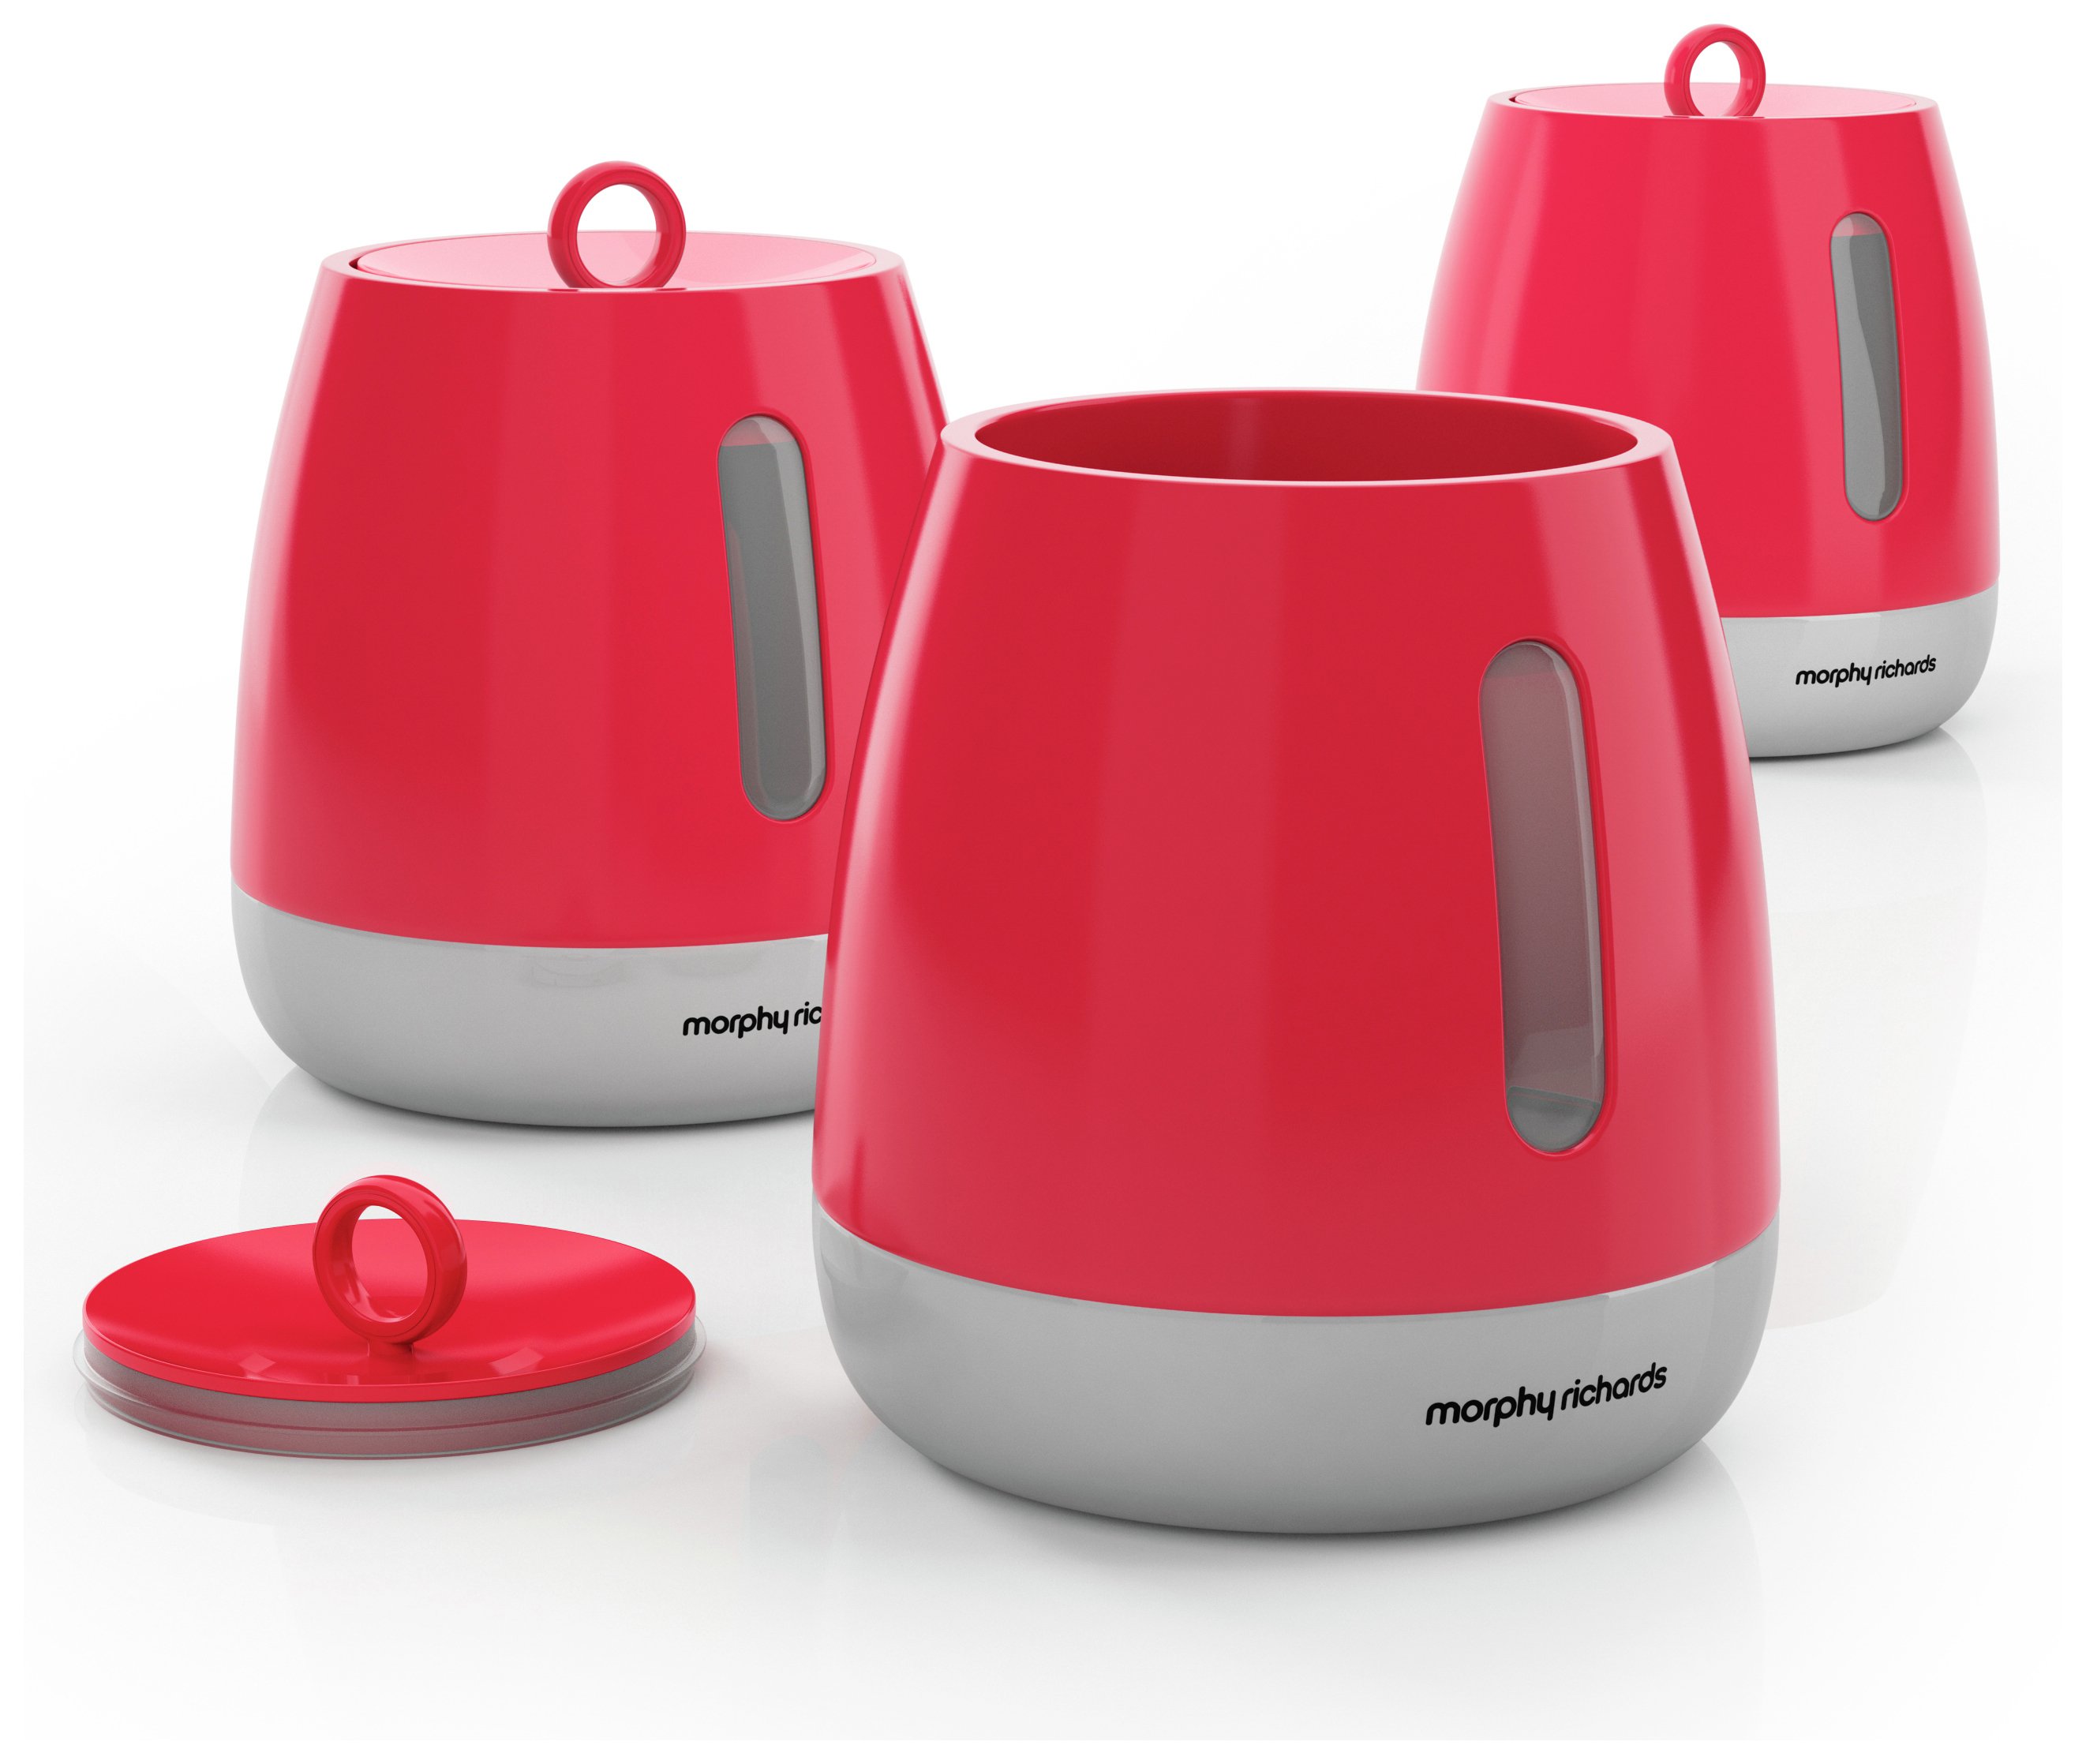 Morphy Richards - Set of 3 Storage Canisters Review